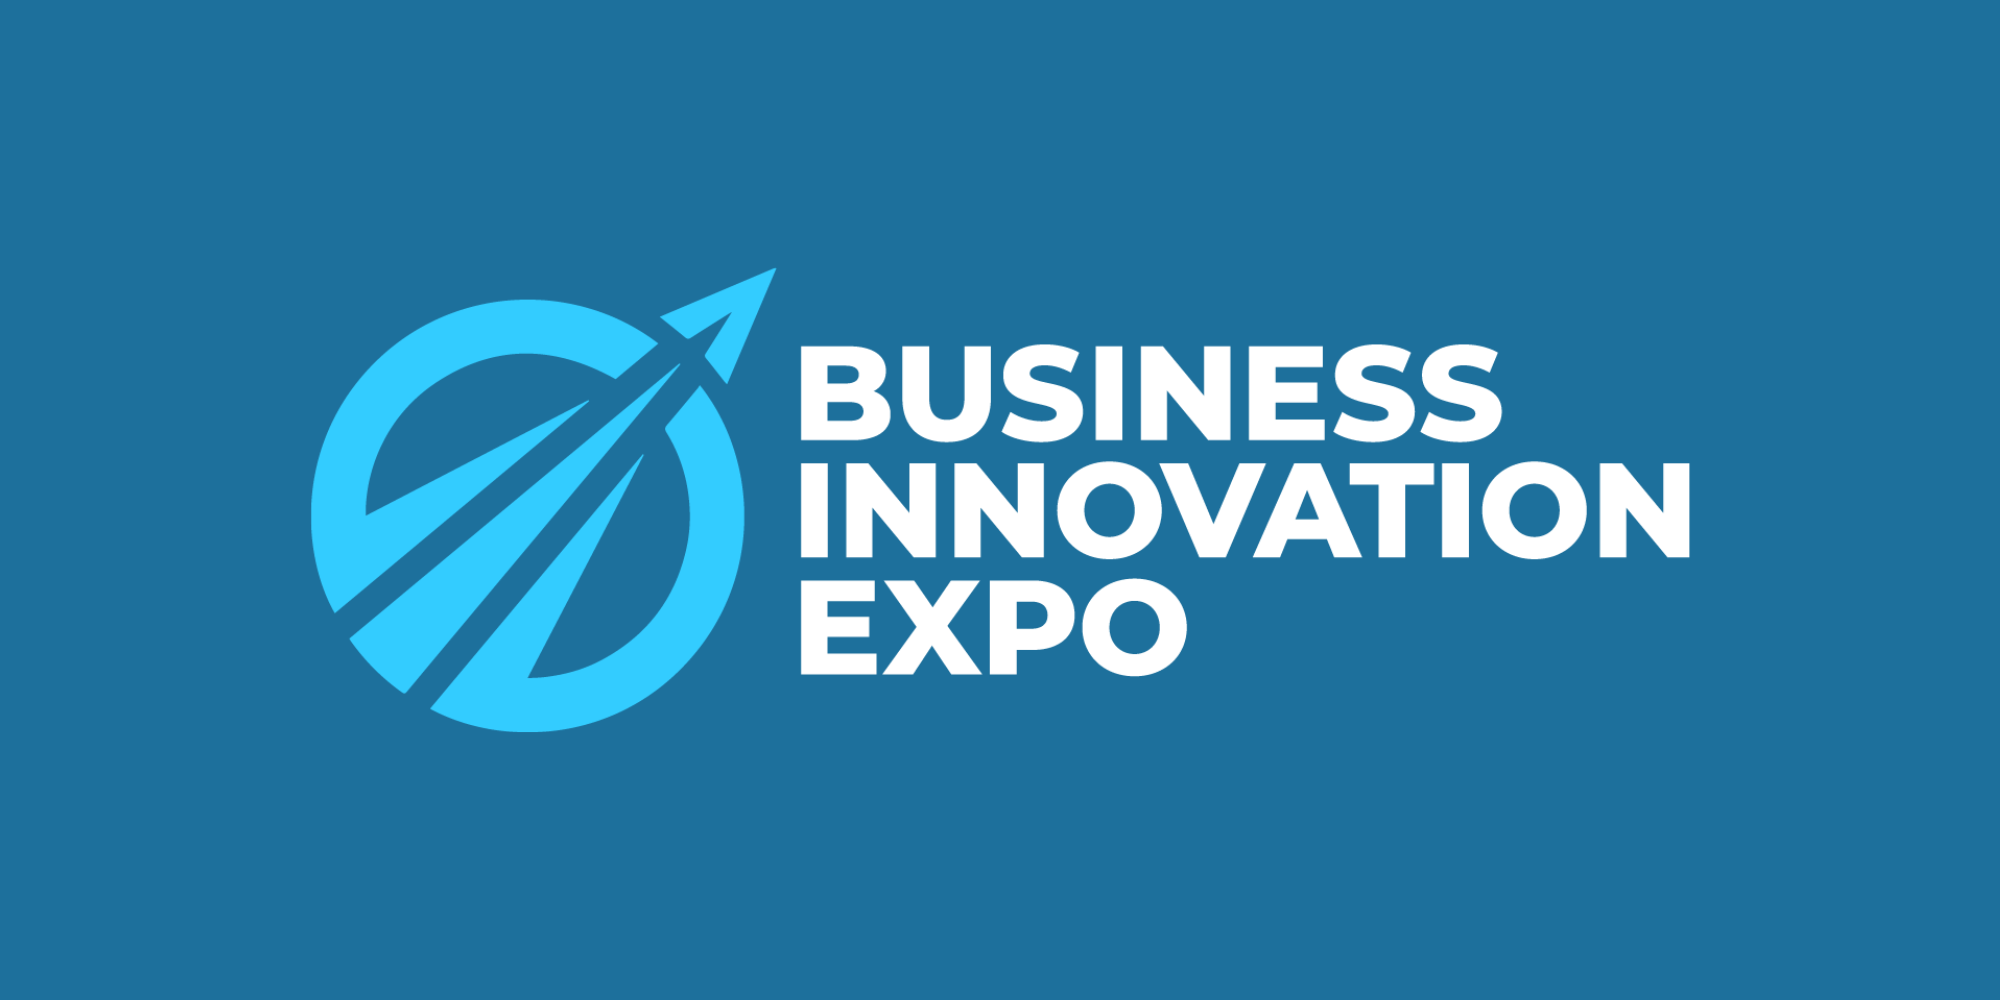 The Business Innovation Expo